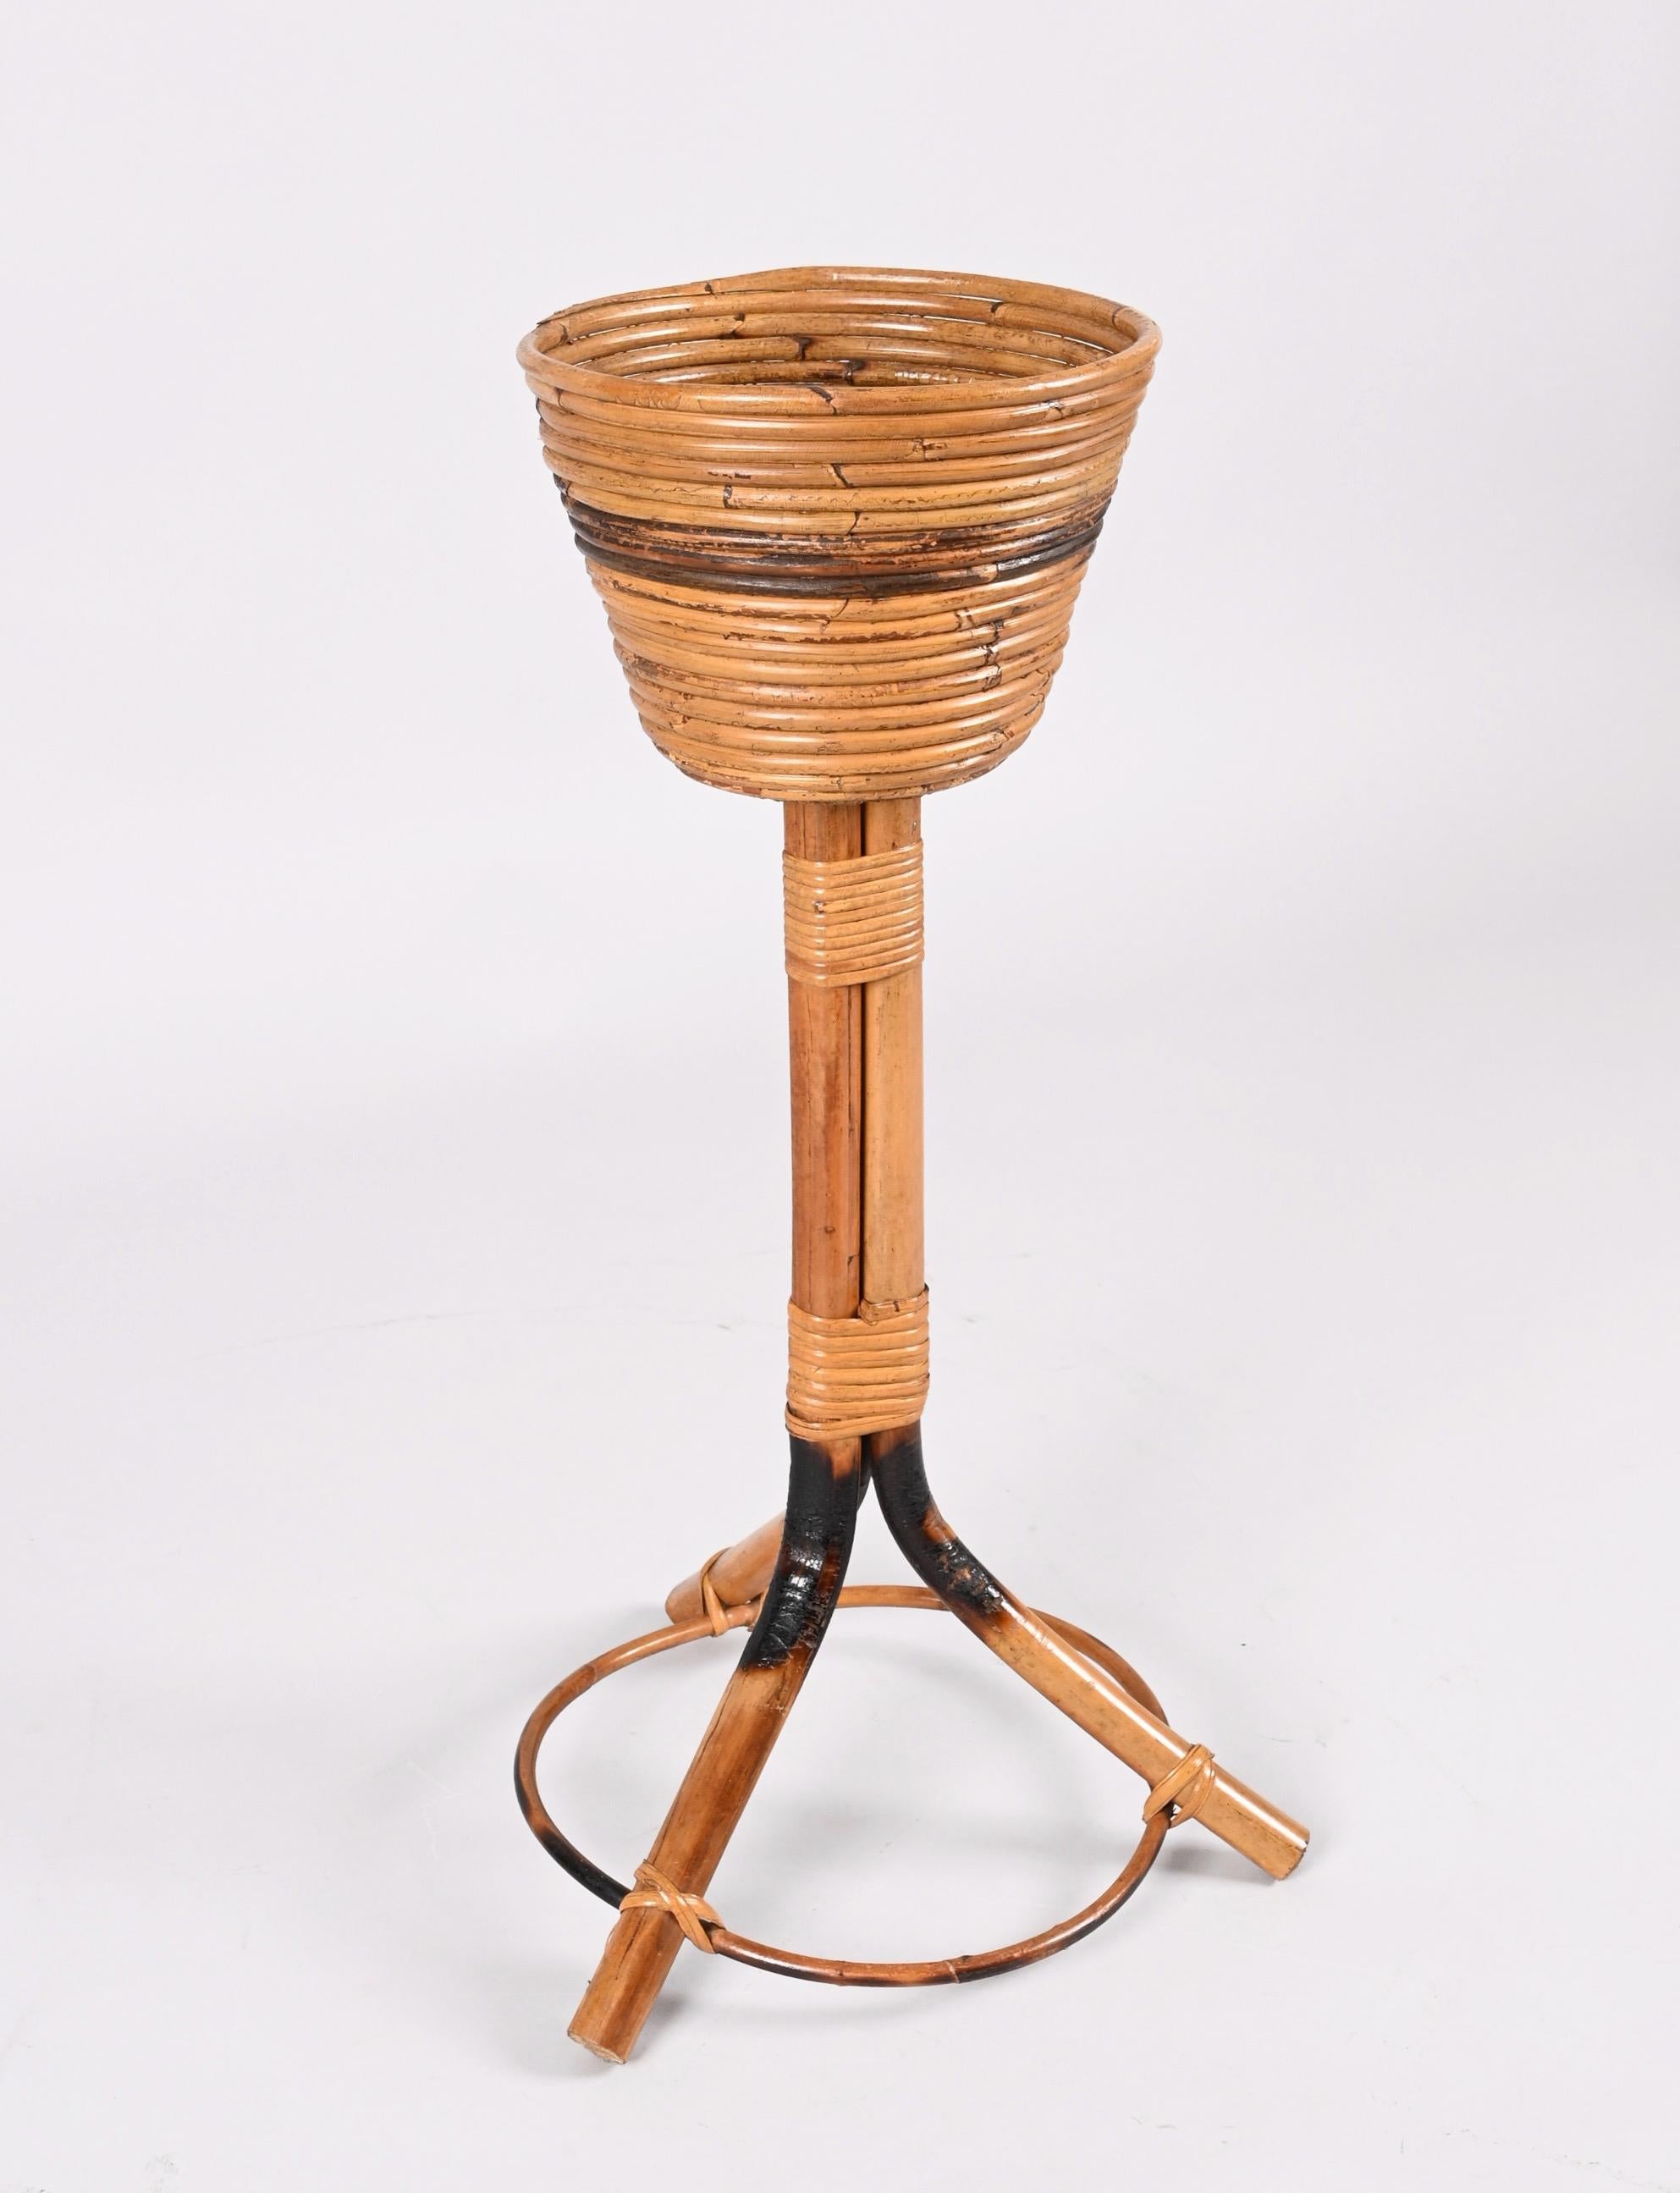 Midcentury Italian Bamboo Cane and Rattan Round Plant Holder, 1950s For Sale 6